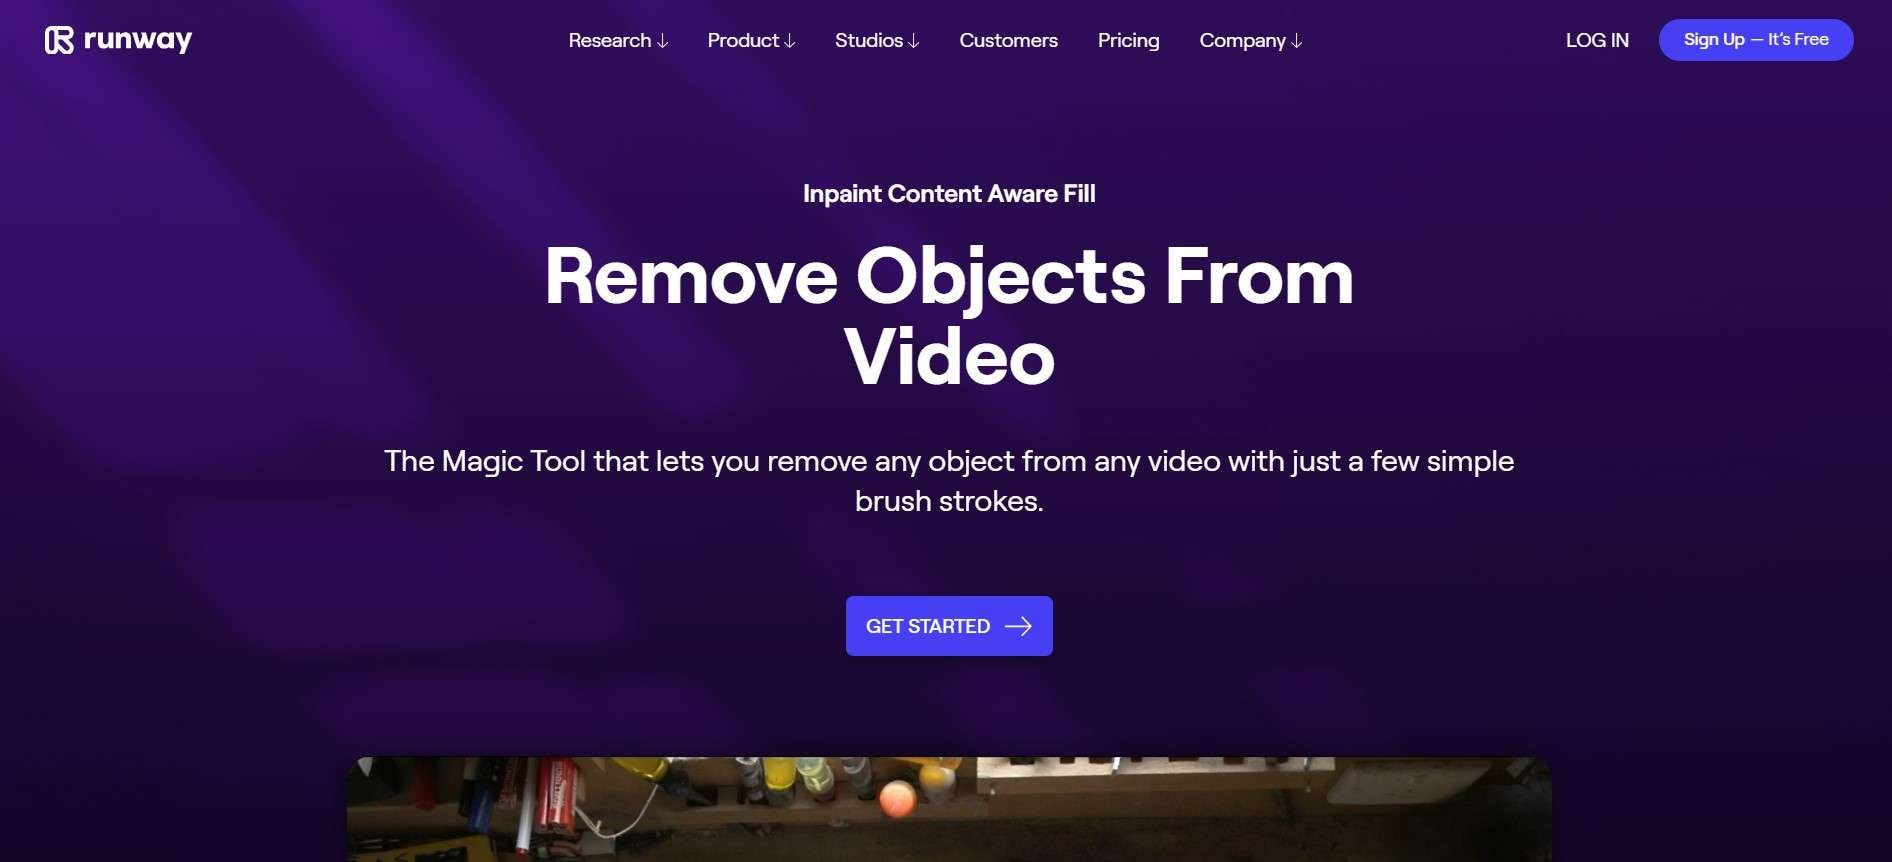 get started with runway to remove objects from video